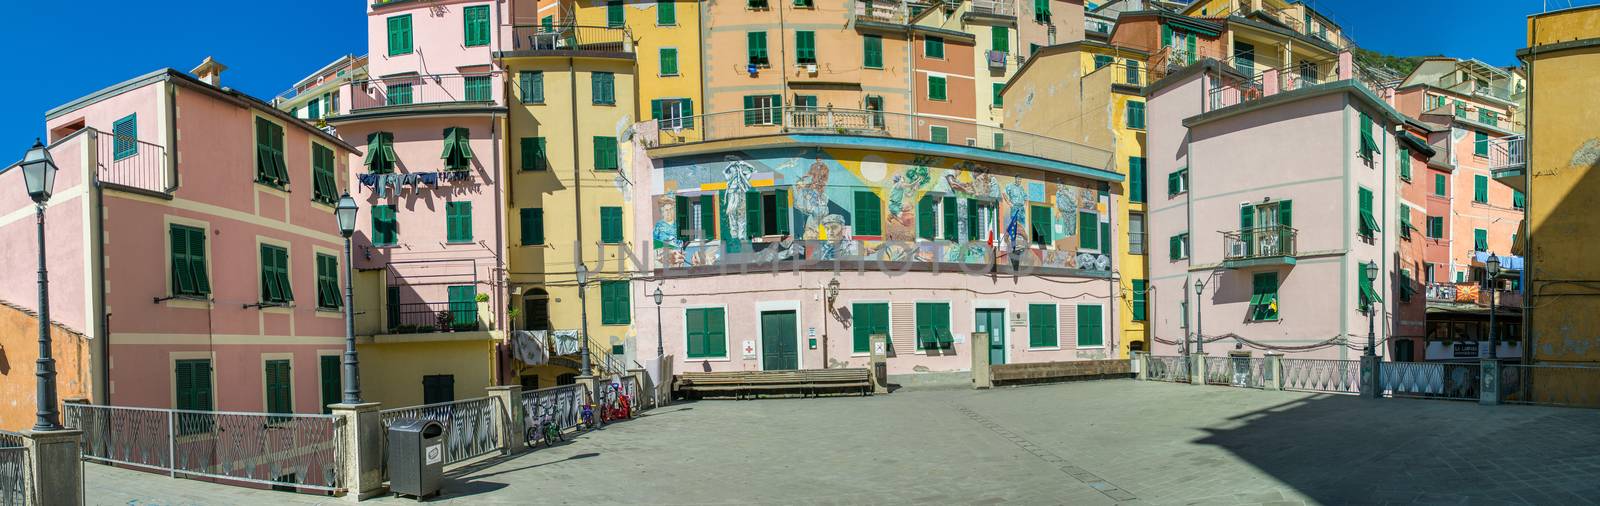 RIOMAGGIORE, ITALY - SEPTEMBER 21, 2014: Colorful city buildings by jovannig